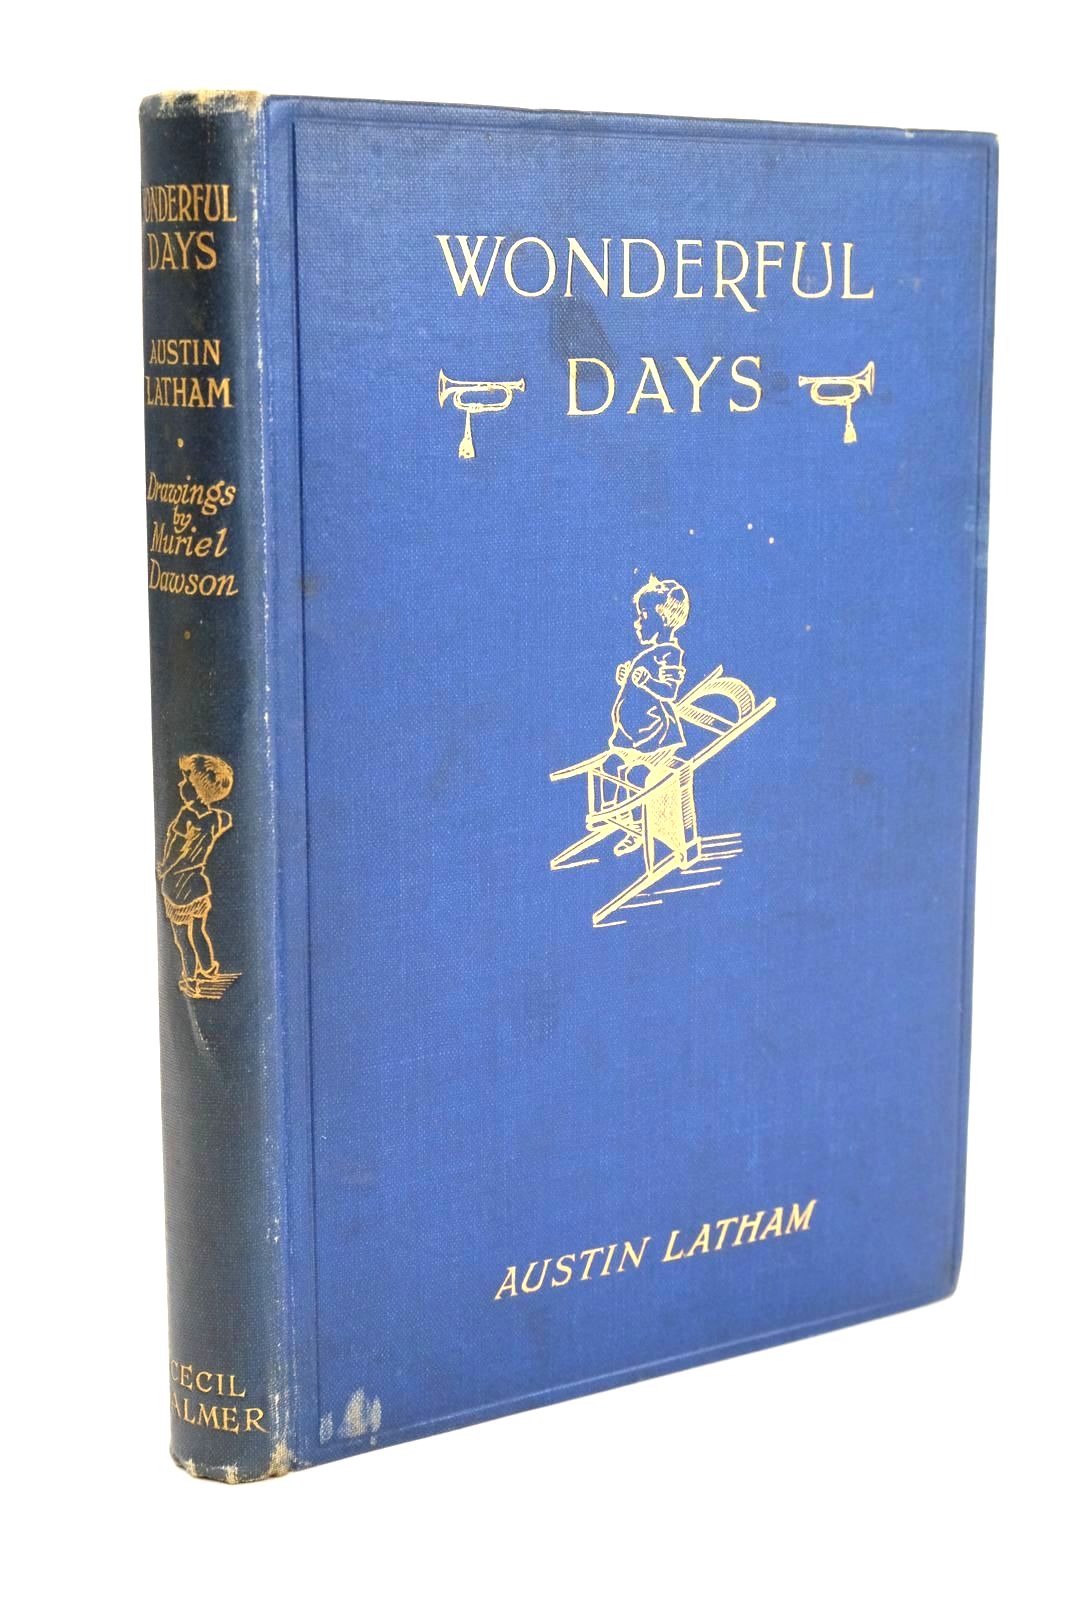 Photo of WONDERFUL DAYS written by Latham, Austin illustrated by Dawson, Muriel published by Cecil Palmer (STOCK CODE: 1325008)  for sale by Stella & Rose's Books